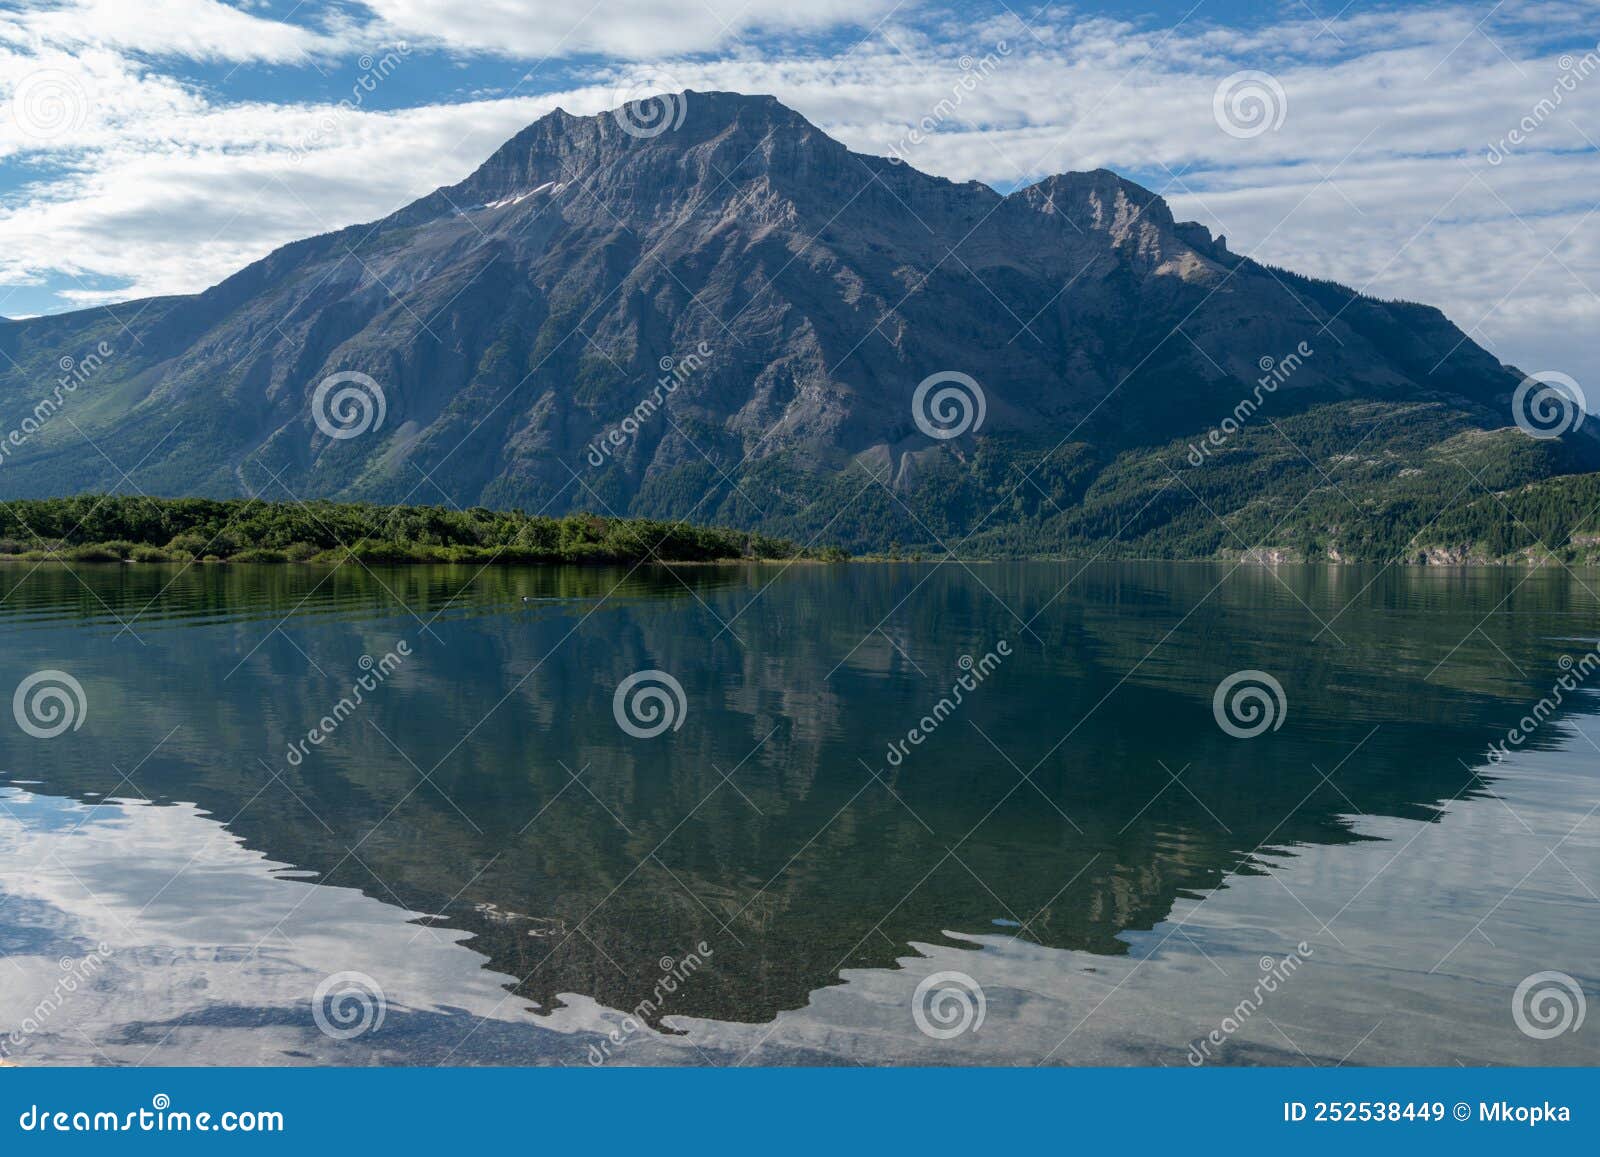 view from driftwood beach in waterton lakes national park in the canadian rockies